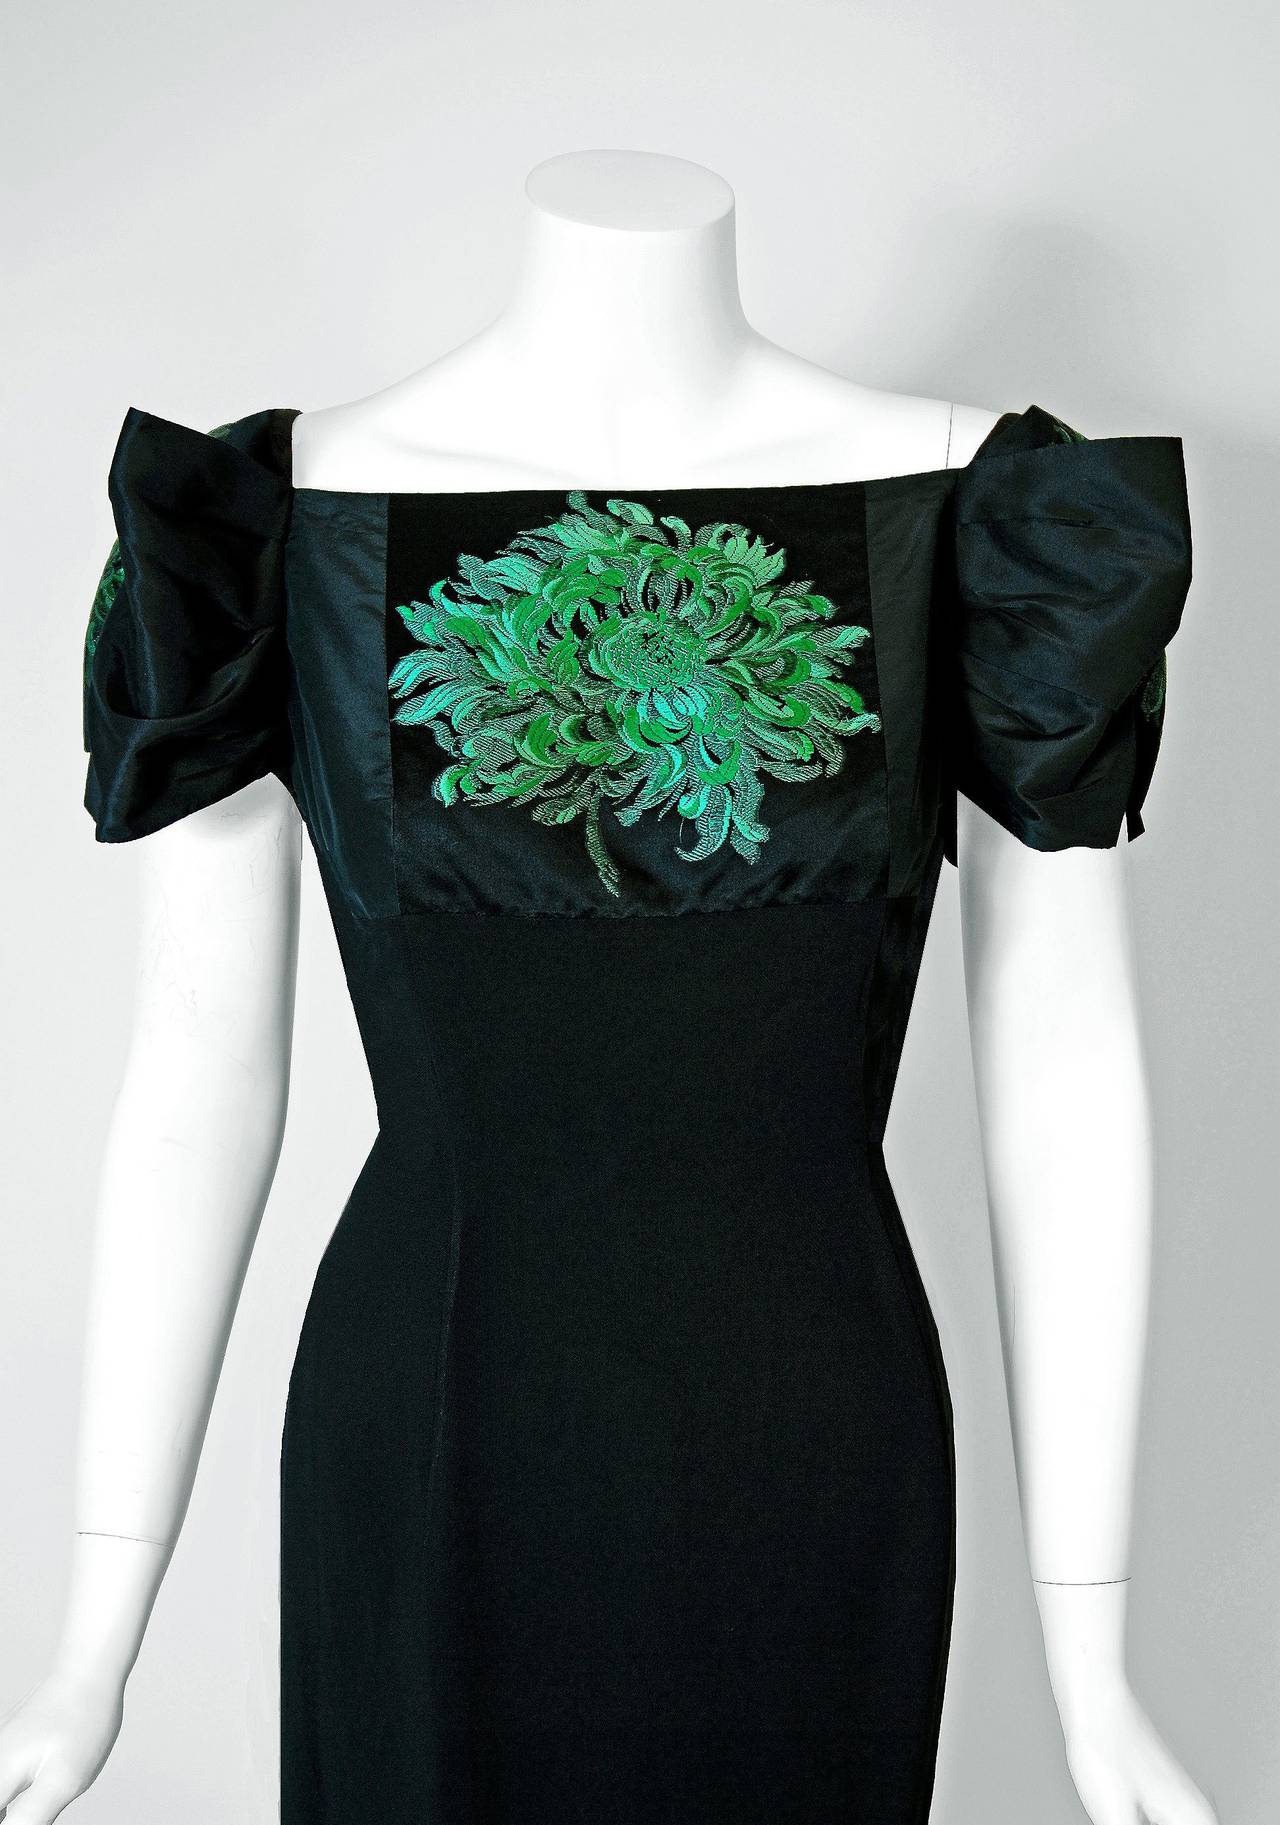 Stunning 1950's black & green Chrysanthemum floral print silk cocktail from the 